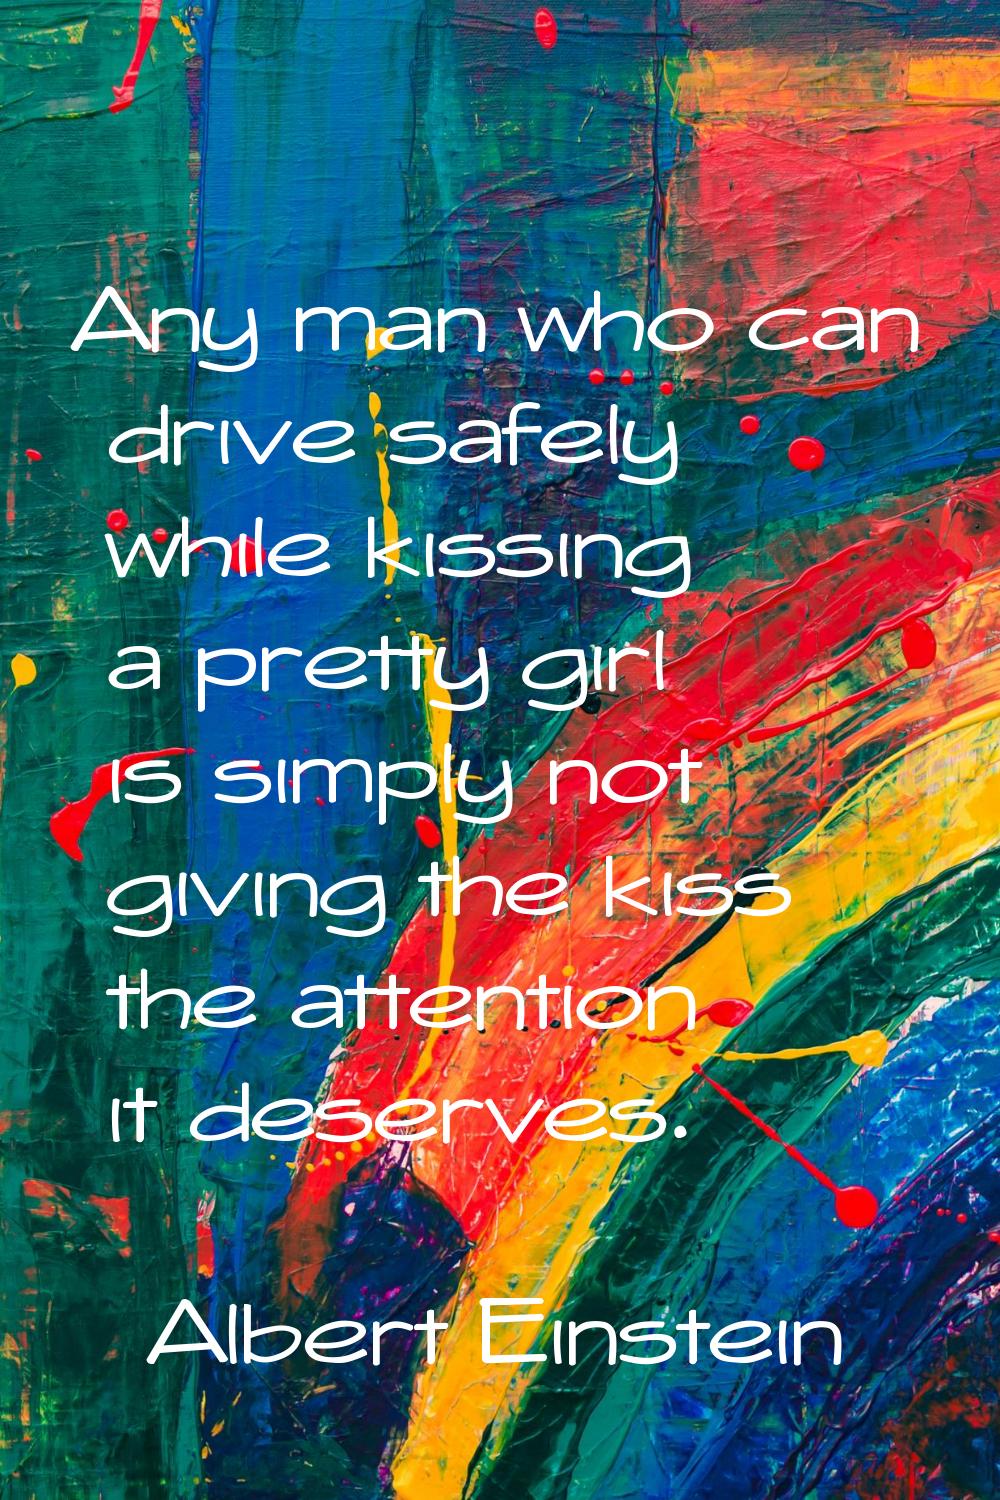 Any man who can drive safely while kissing a pretty girl is simply not giving the kiss the attentio